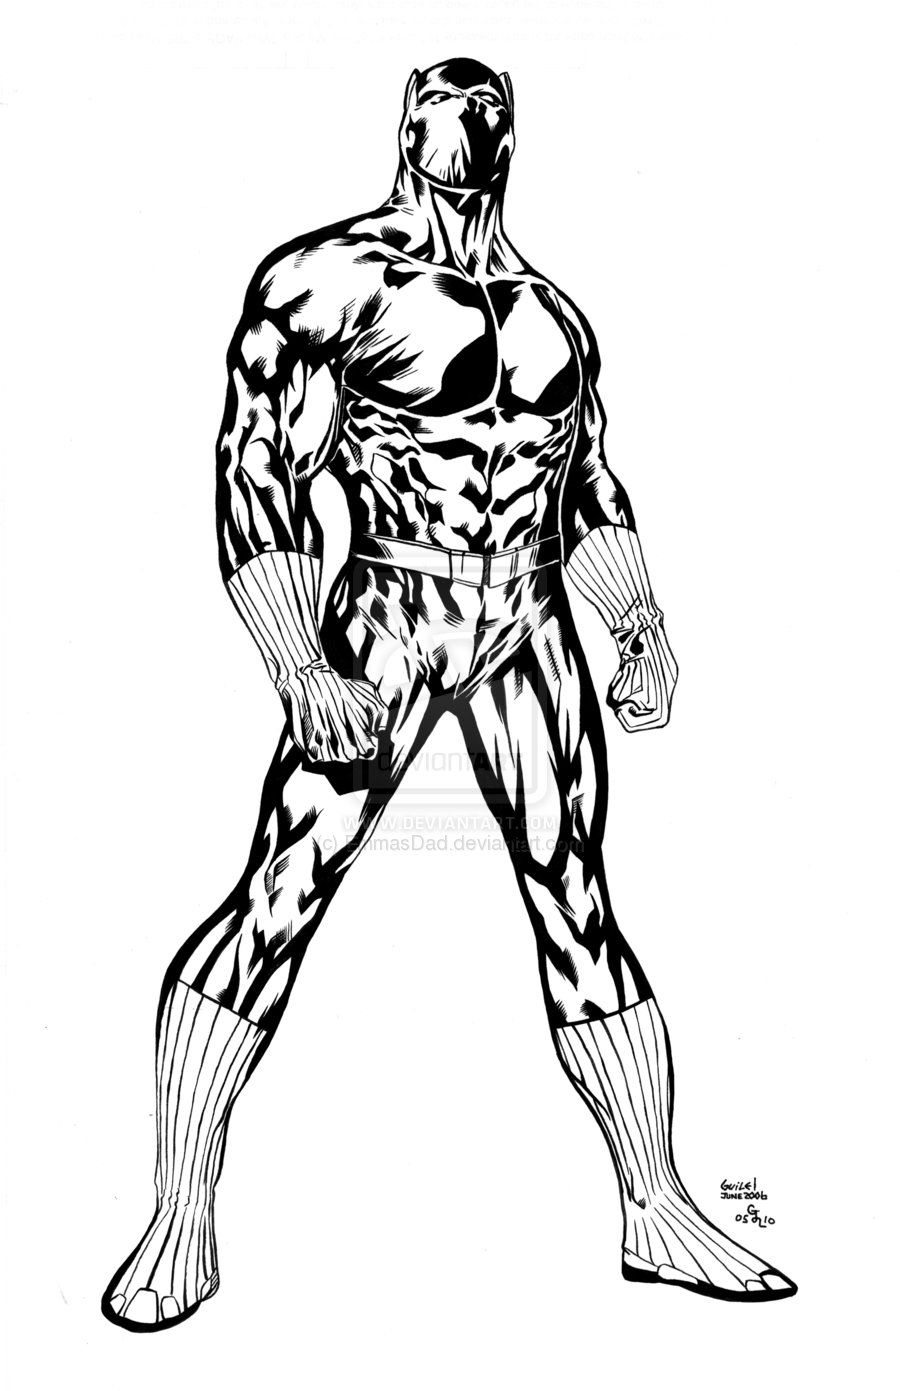 14 Pics of Black Panther Superhero Coloring Pages - Black Panther ...